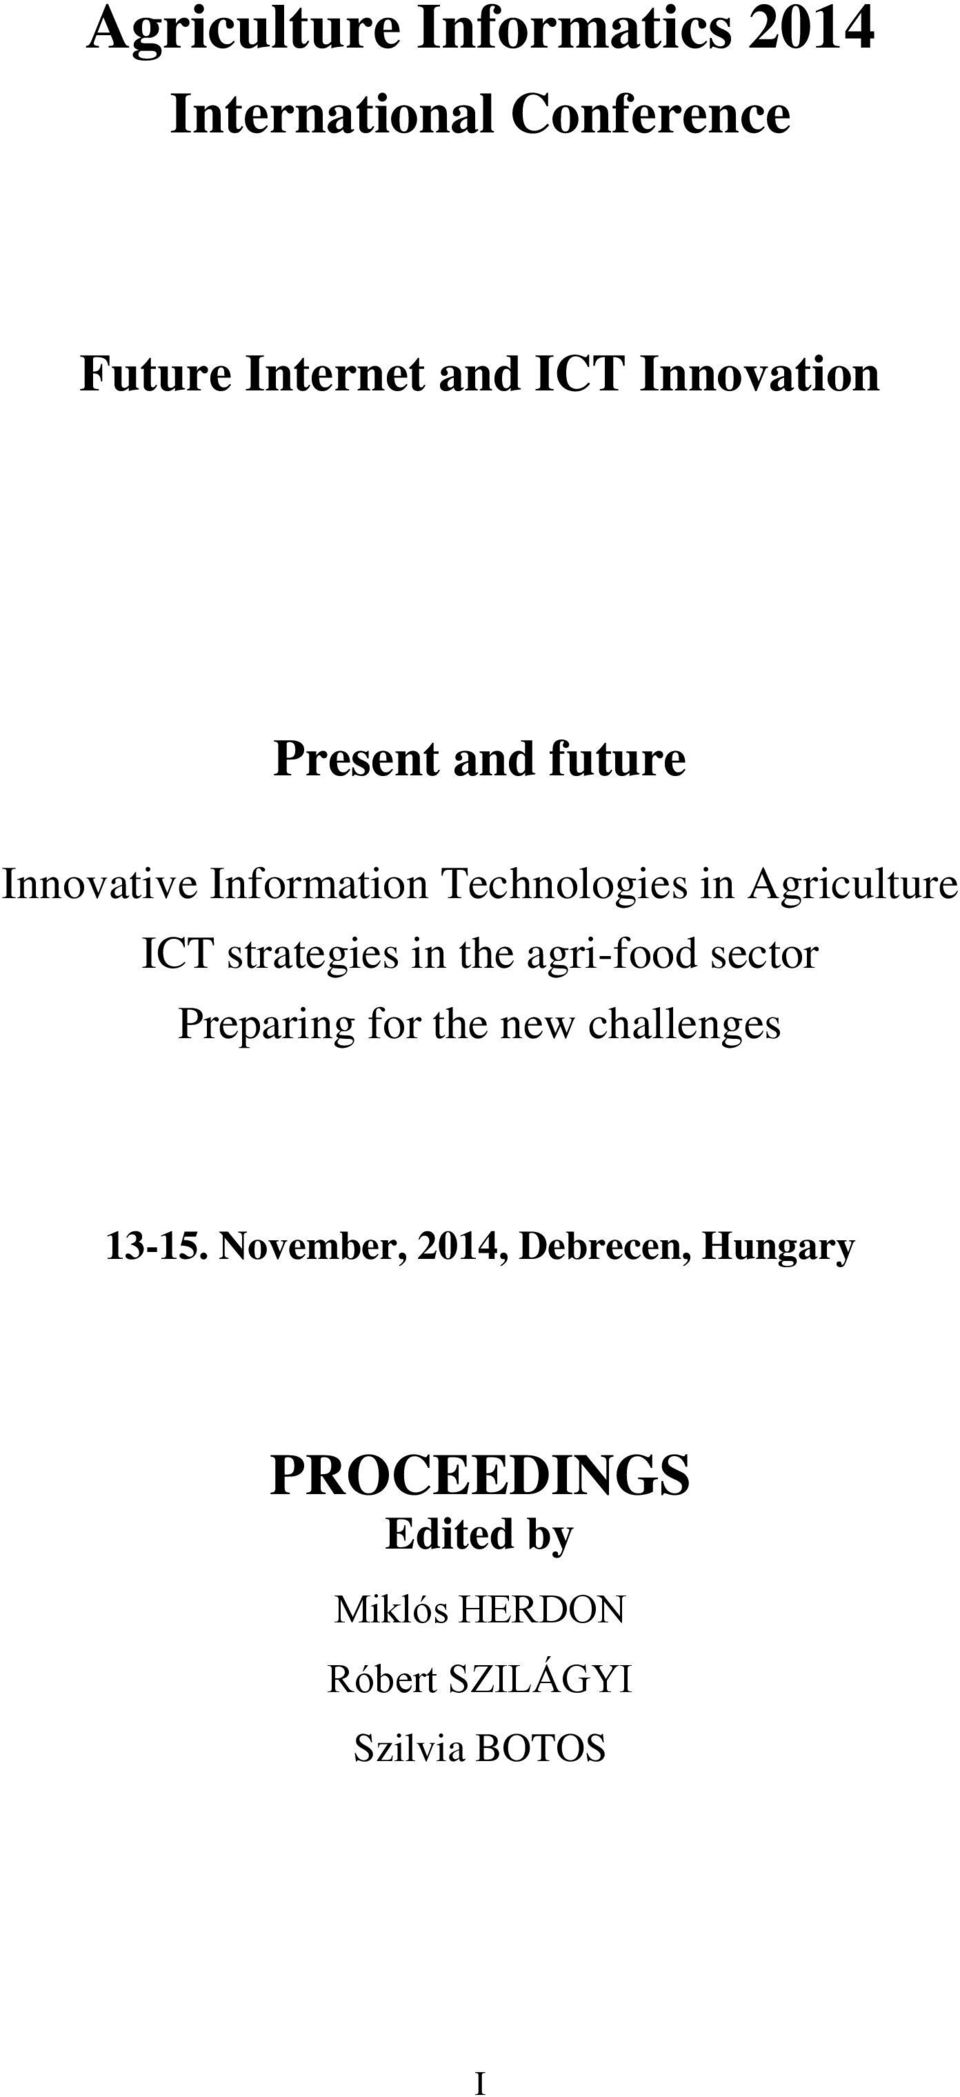 strategies in the agri-food sector Preparing for the new challenges 13-15.